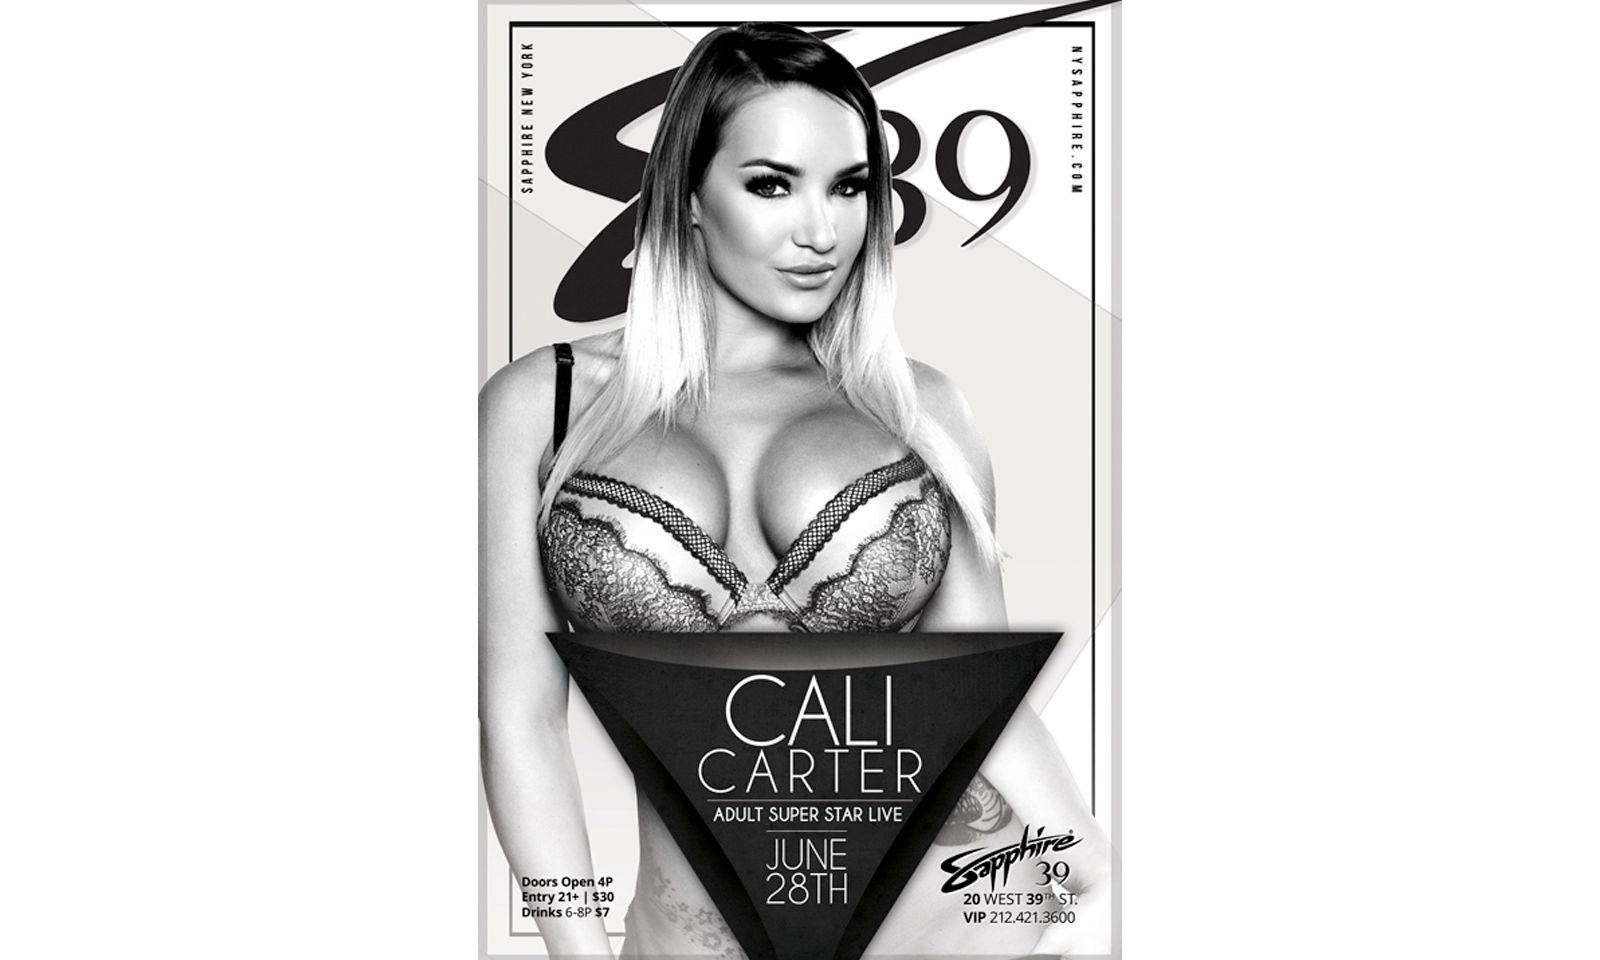 Cali Carter Featuring at Sapphire 39 NYC On Thursday